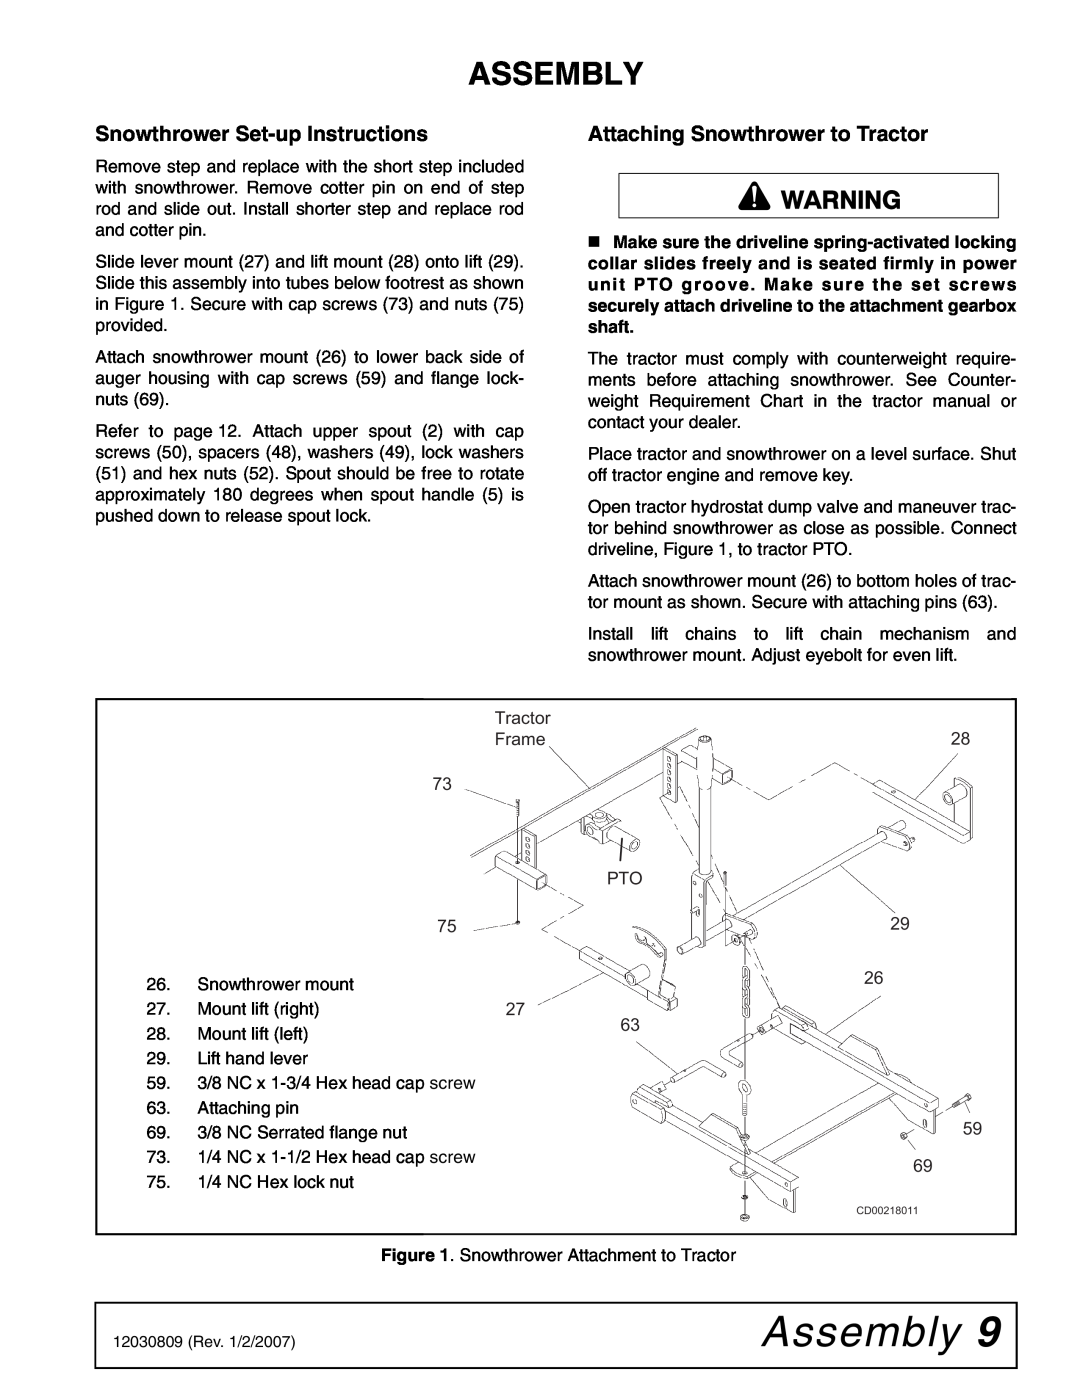 Woods Equipment ST500 manual Assembly, Snowthrower Set-up Instructions, Attaching Snowthrower to Tractor 